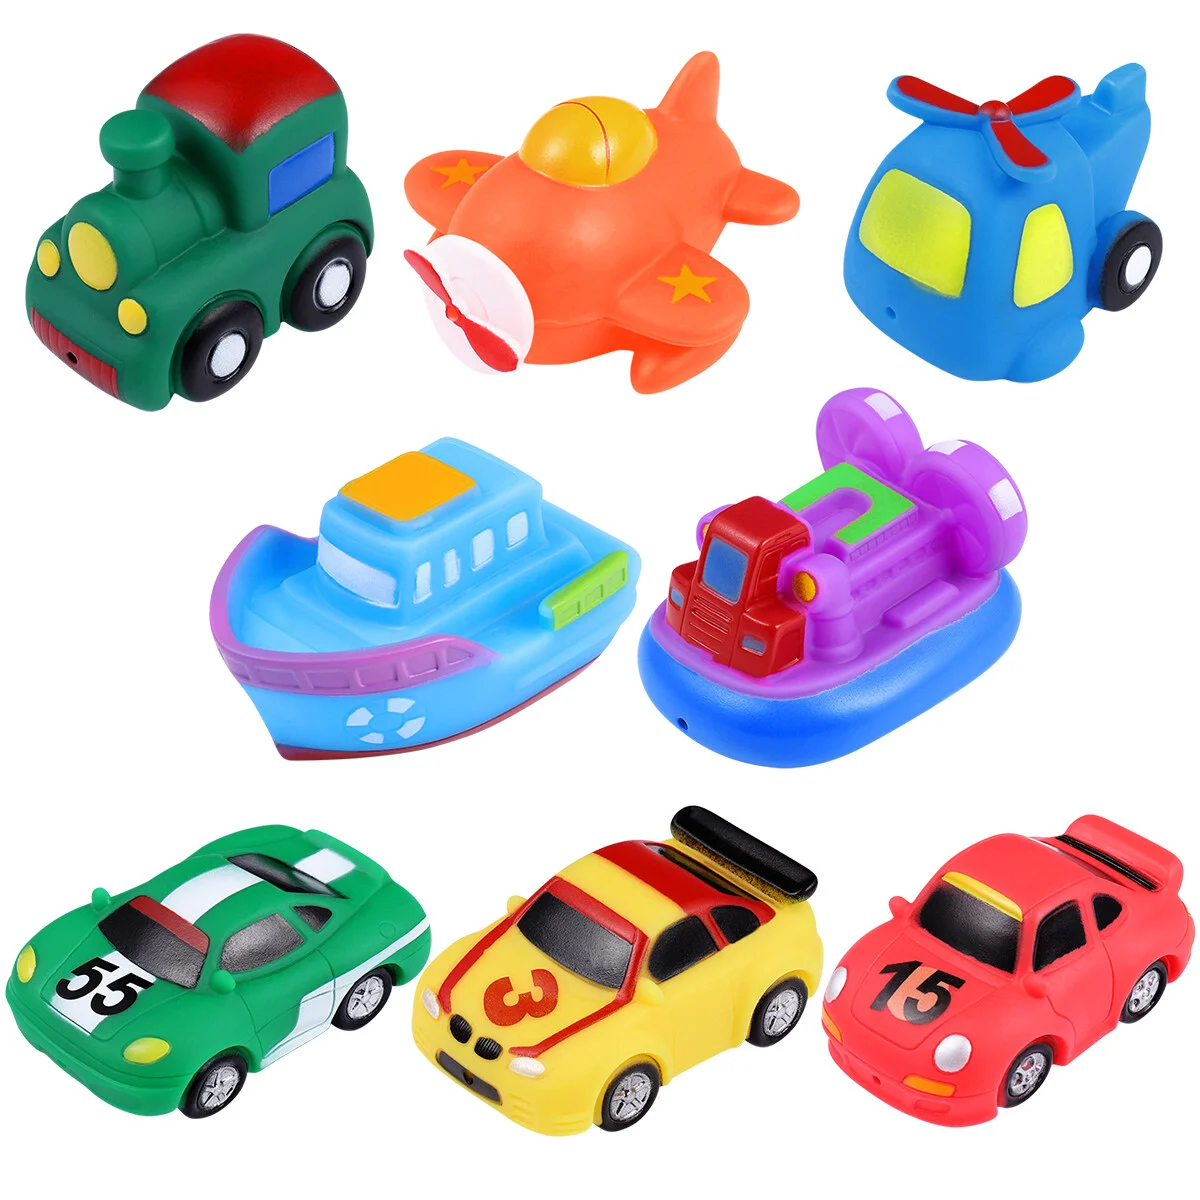 

Toy Kids Tub Toys For Infants Toddlers Squeeze Sound Floating Vehicle Bathing Bathtime Child